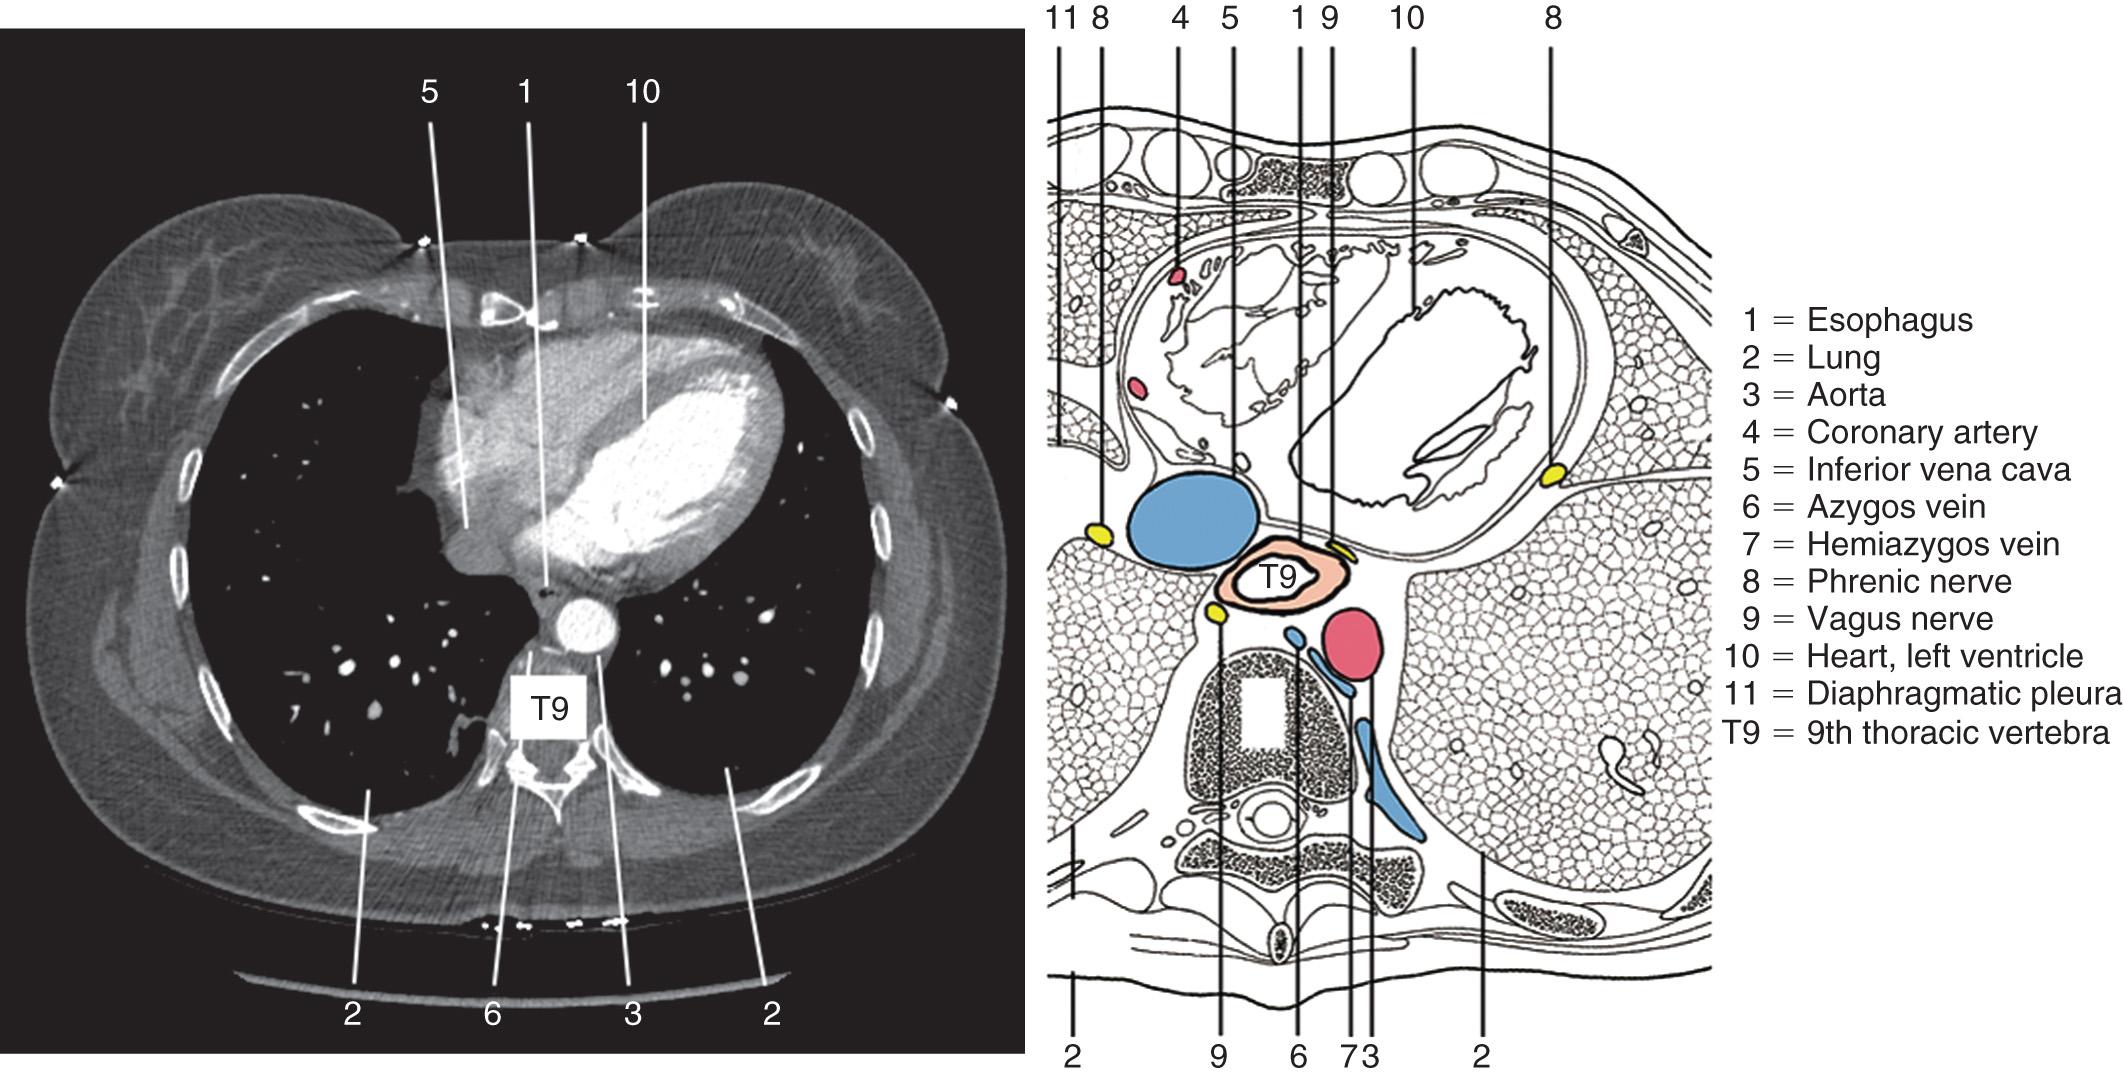 FIGURE 4.12, Topographic anatomy of the lower thoracic esophagus at the level of the left atrium, along with a corresponding computed tomography image.